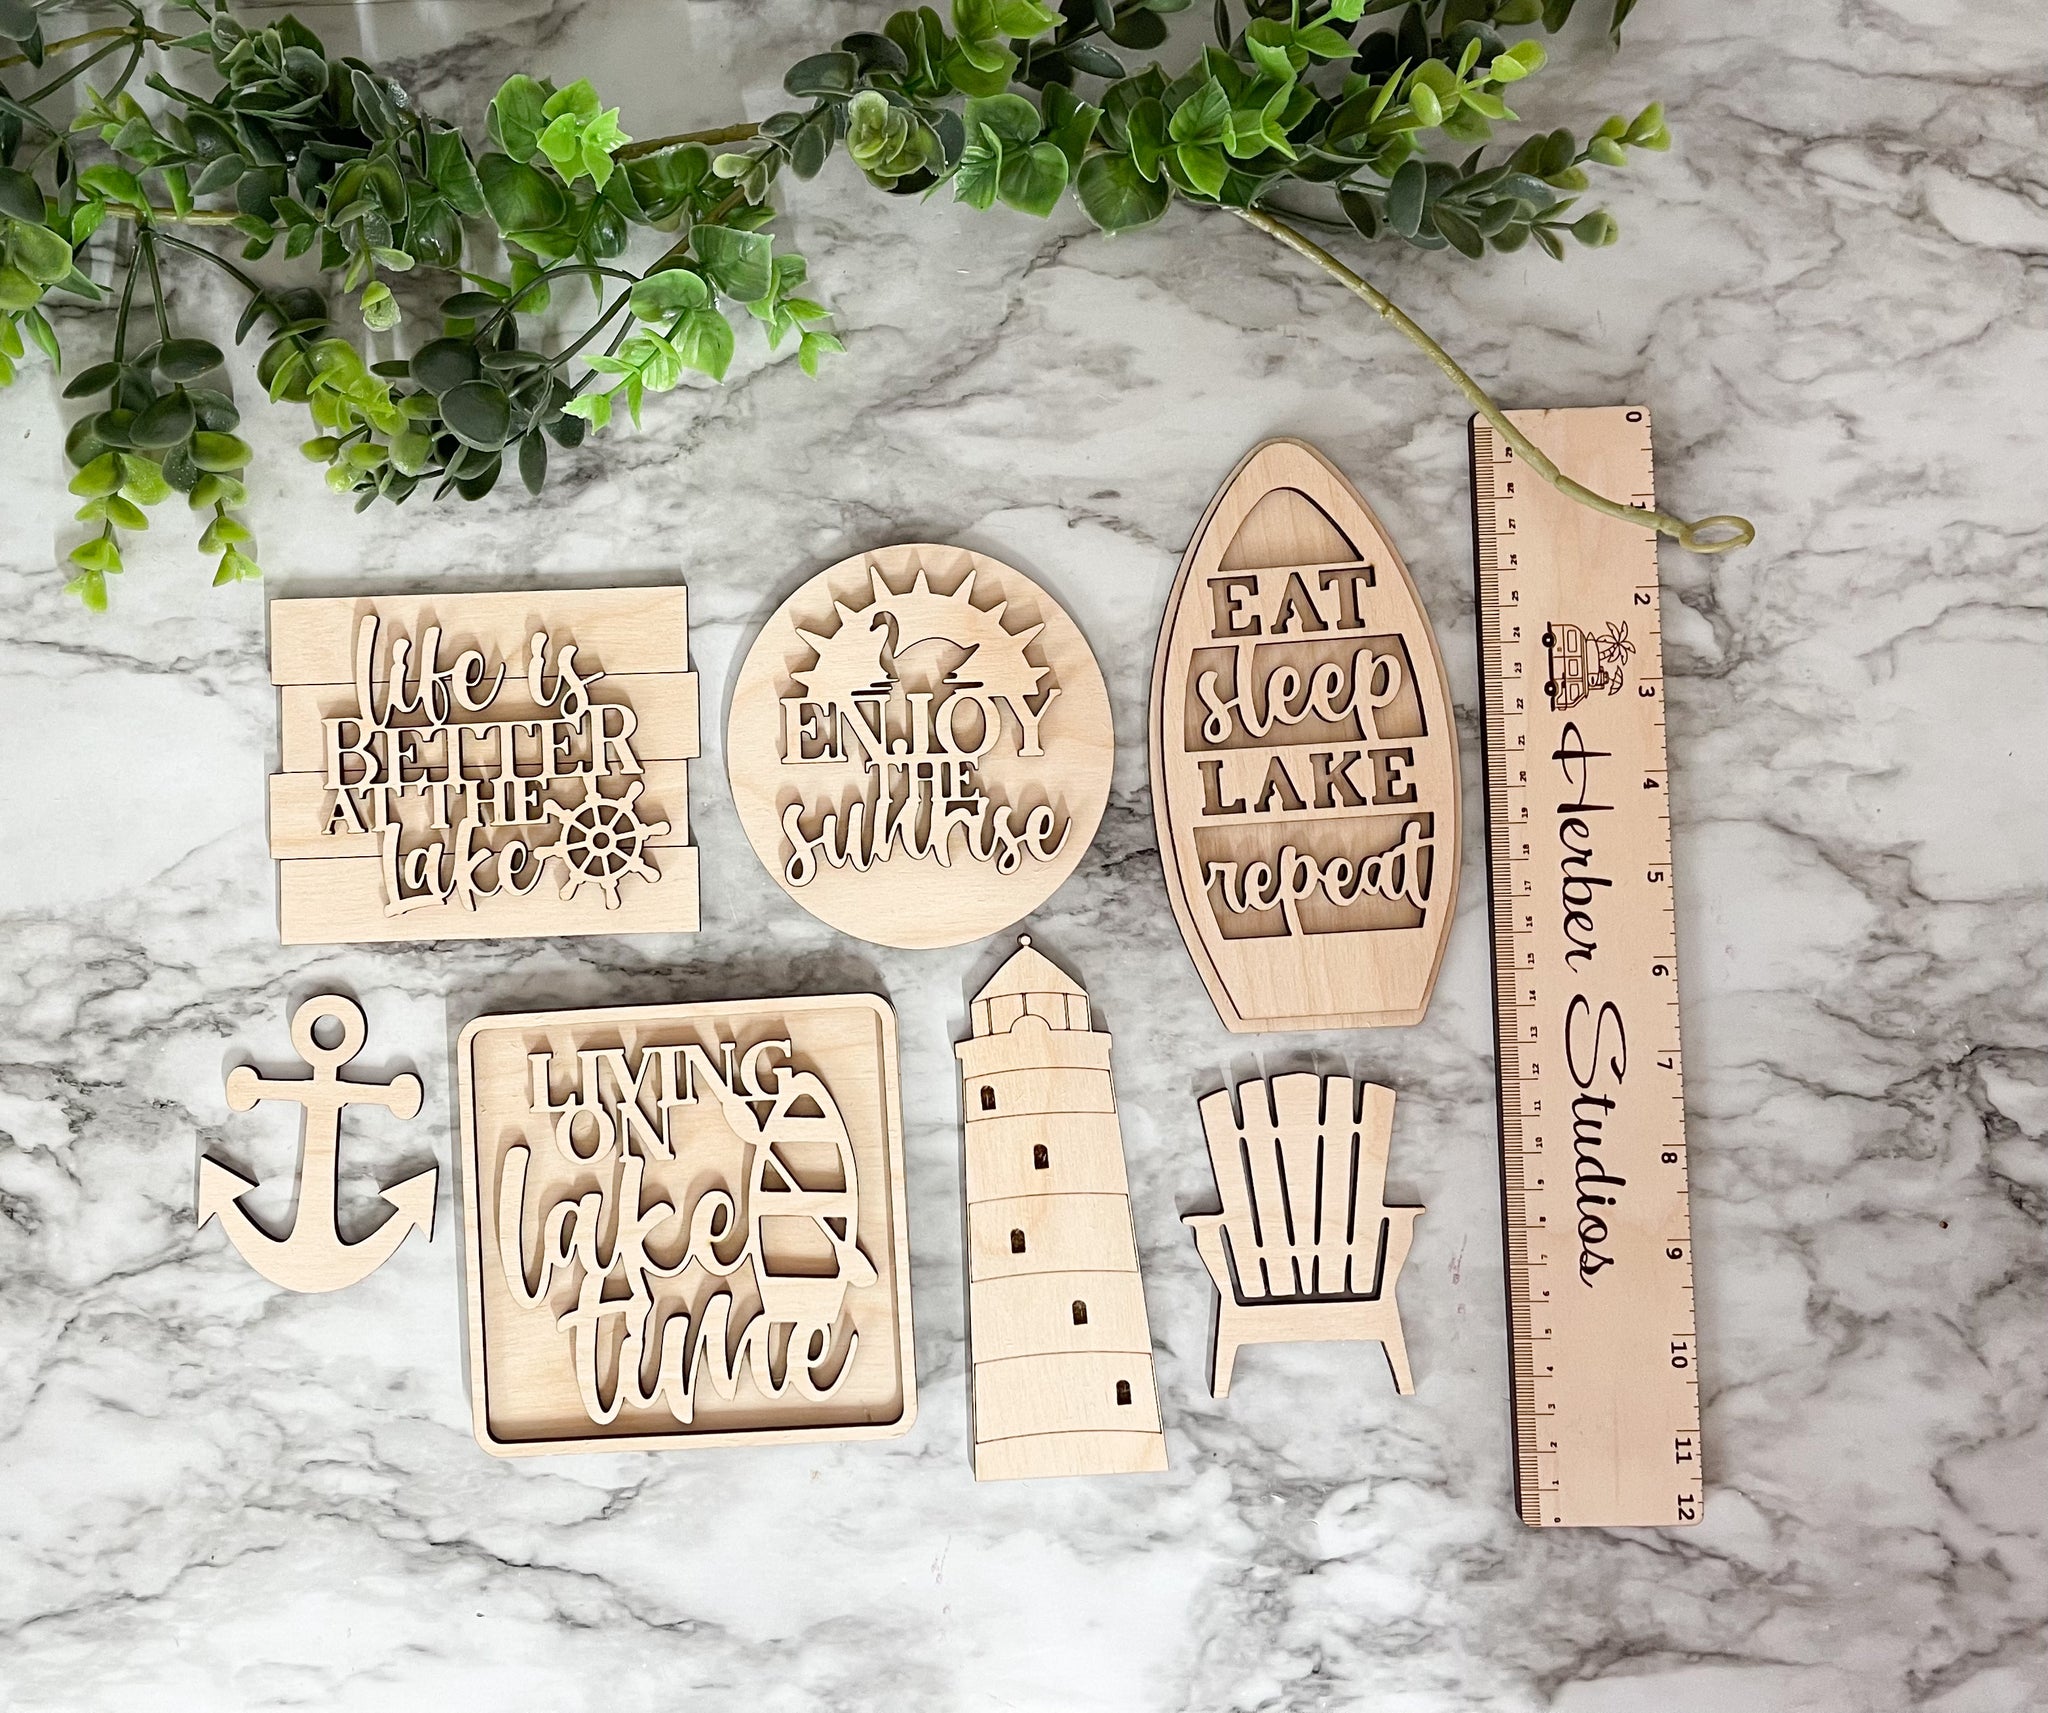 Artistic and Quirky laser engraving blanks at Lowest Prices